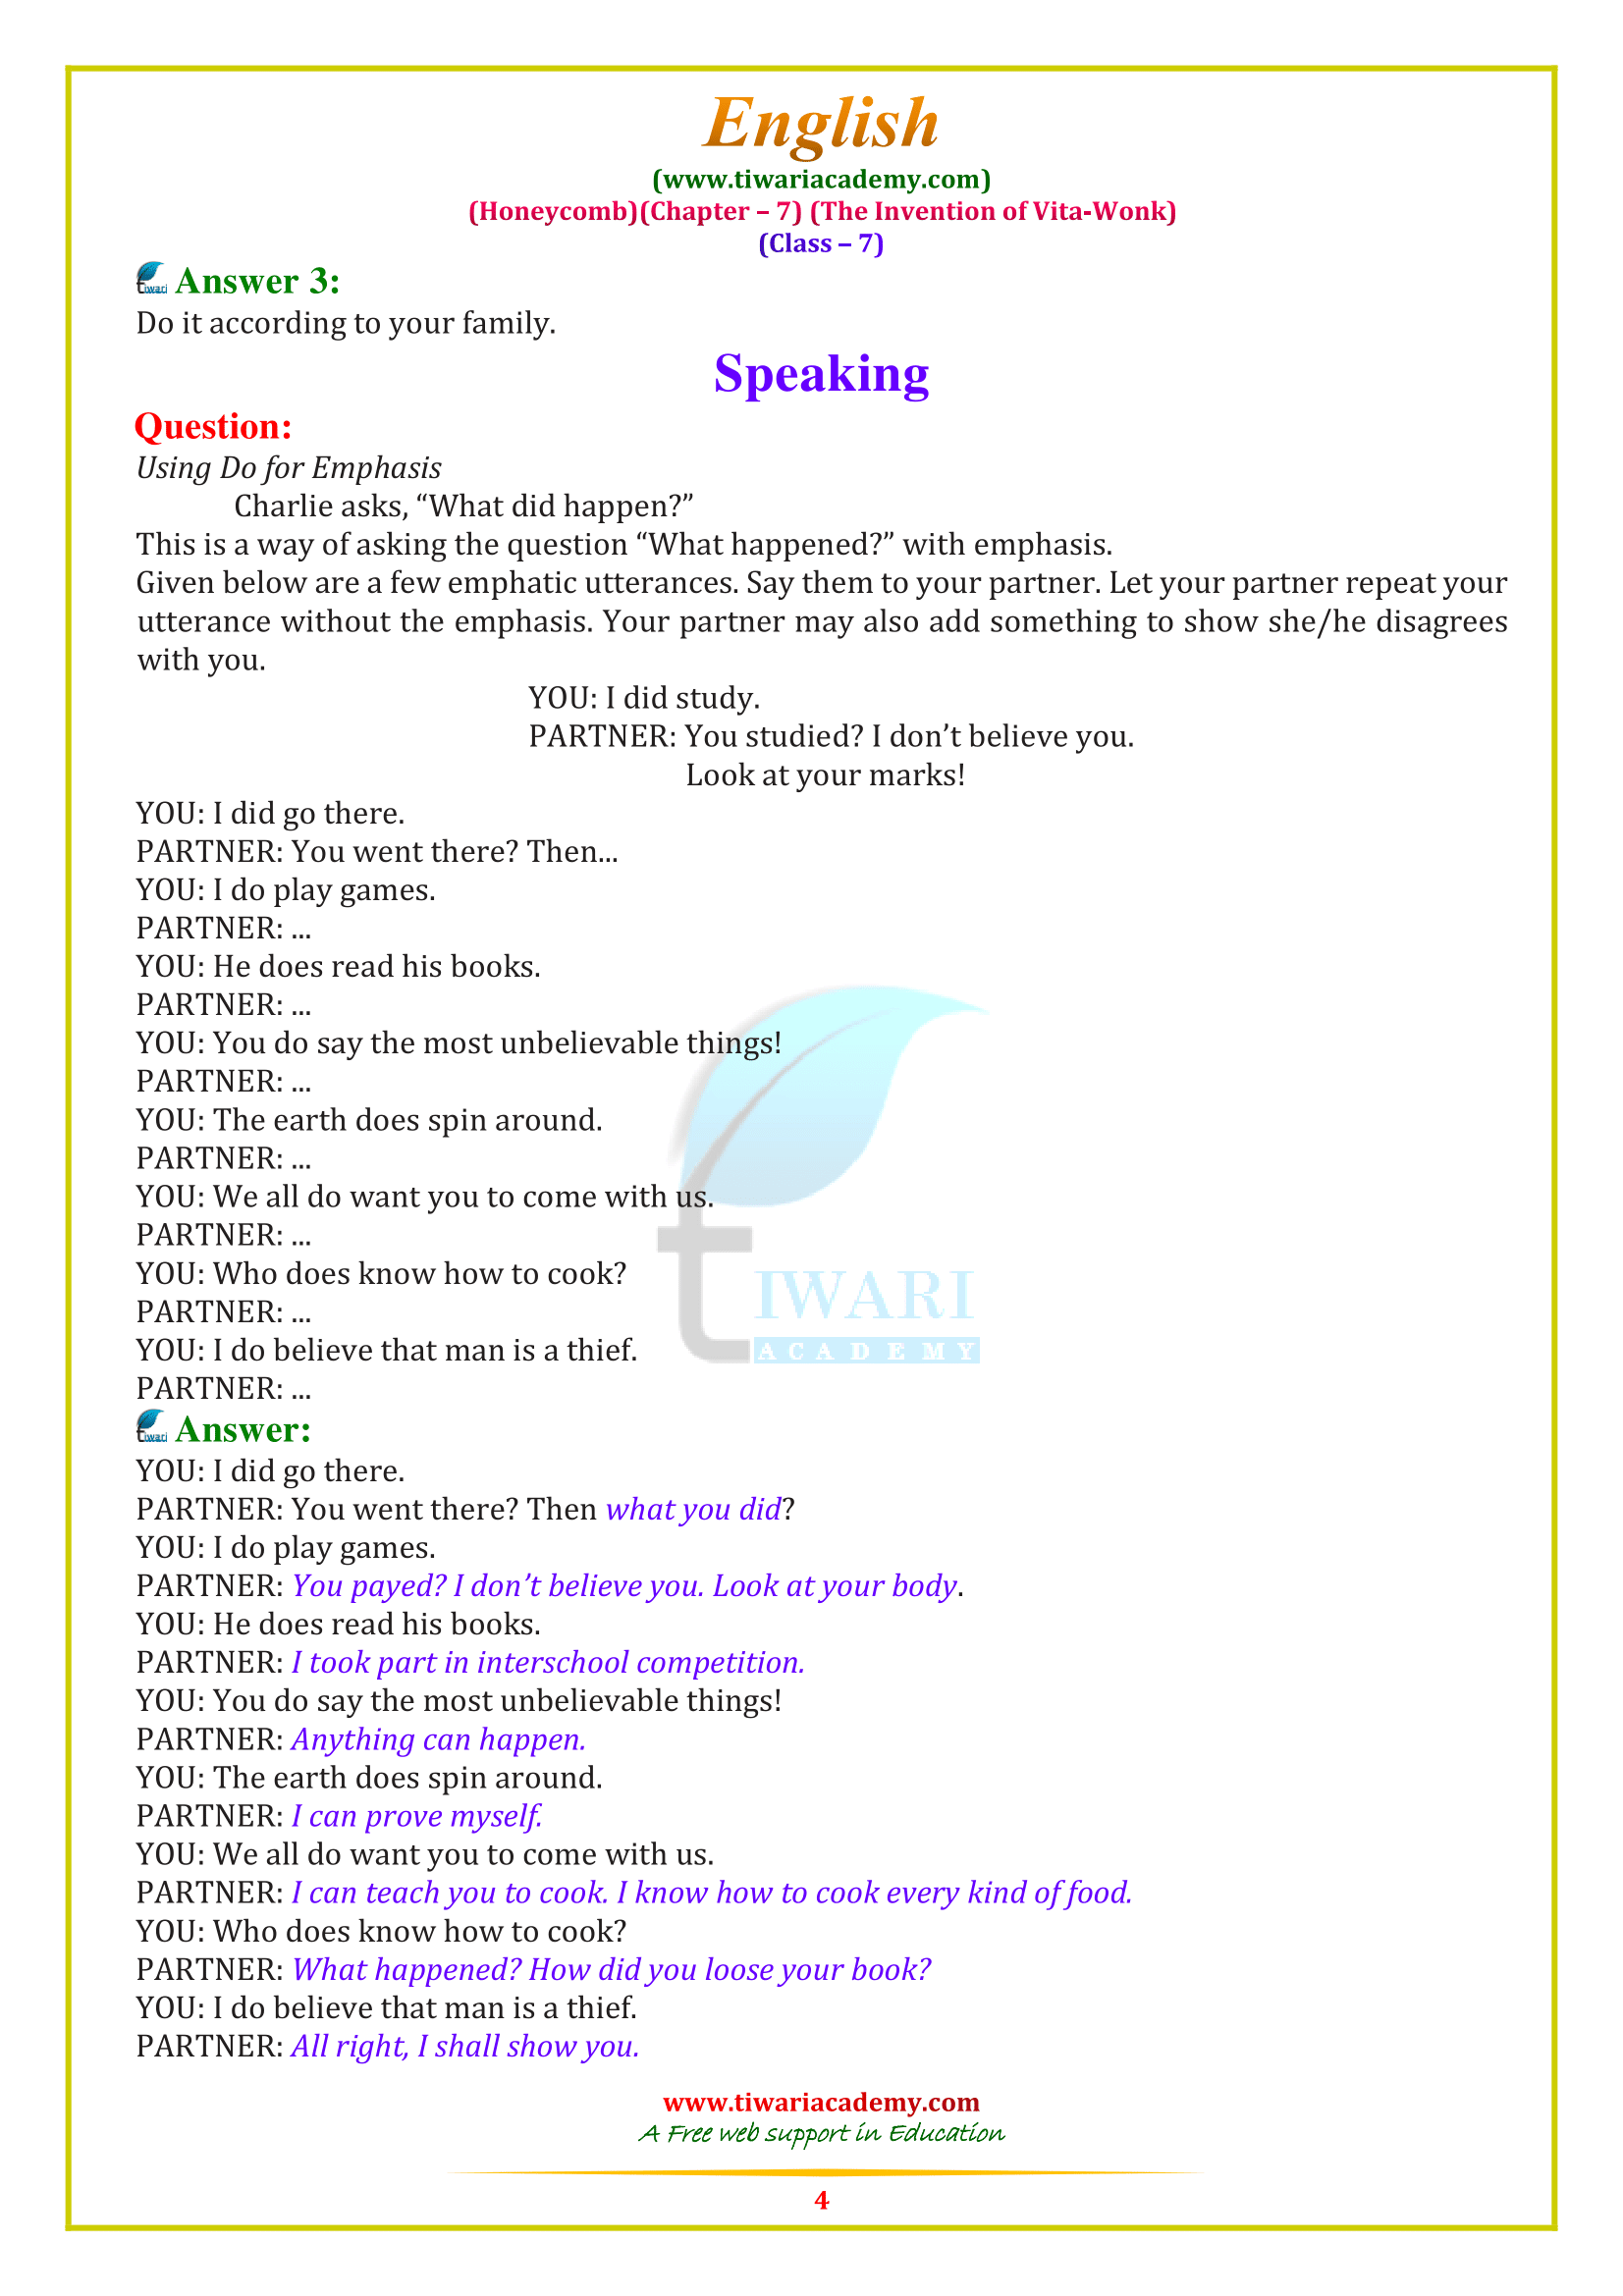 English for class 7 chapter 7